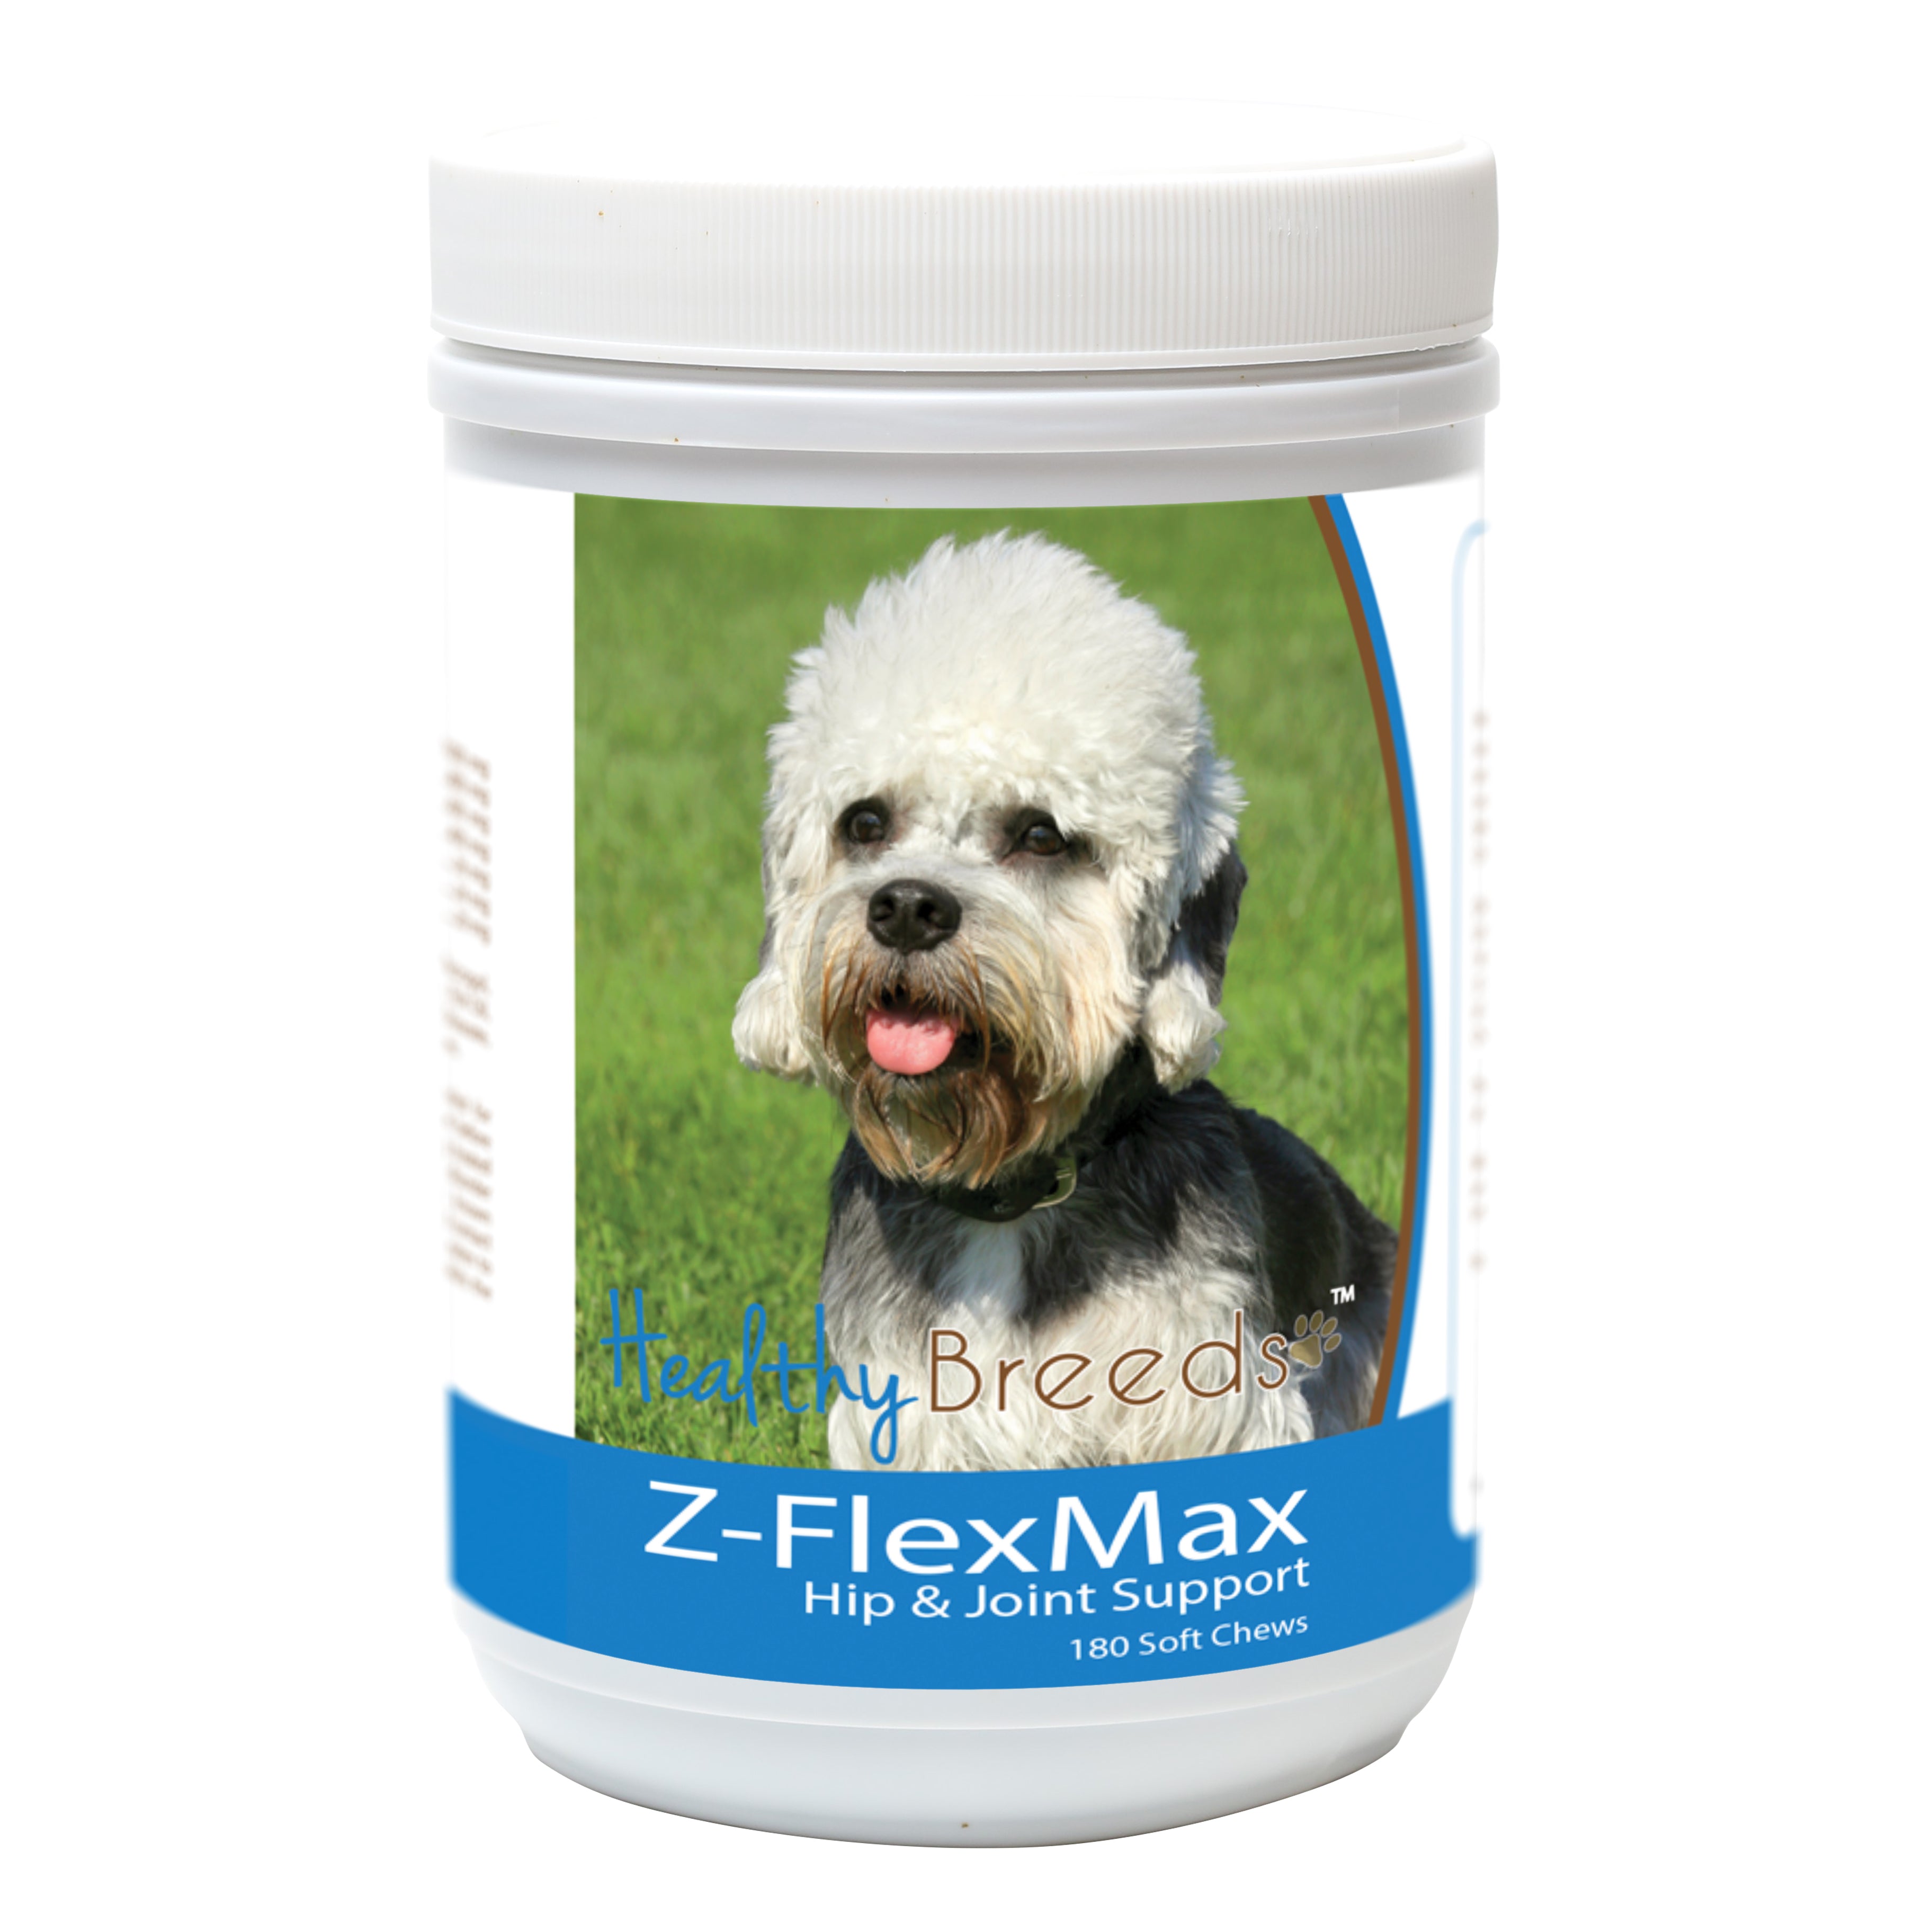 Dandie Dinmont Terrier Z-Flex Max Dog Hip and Joint Support 180 Count